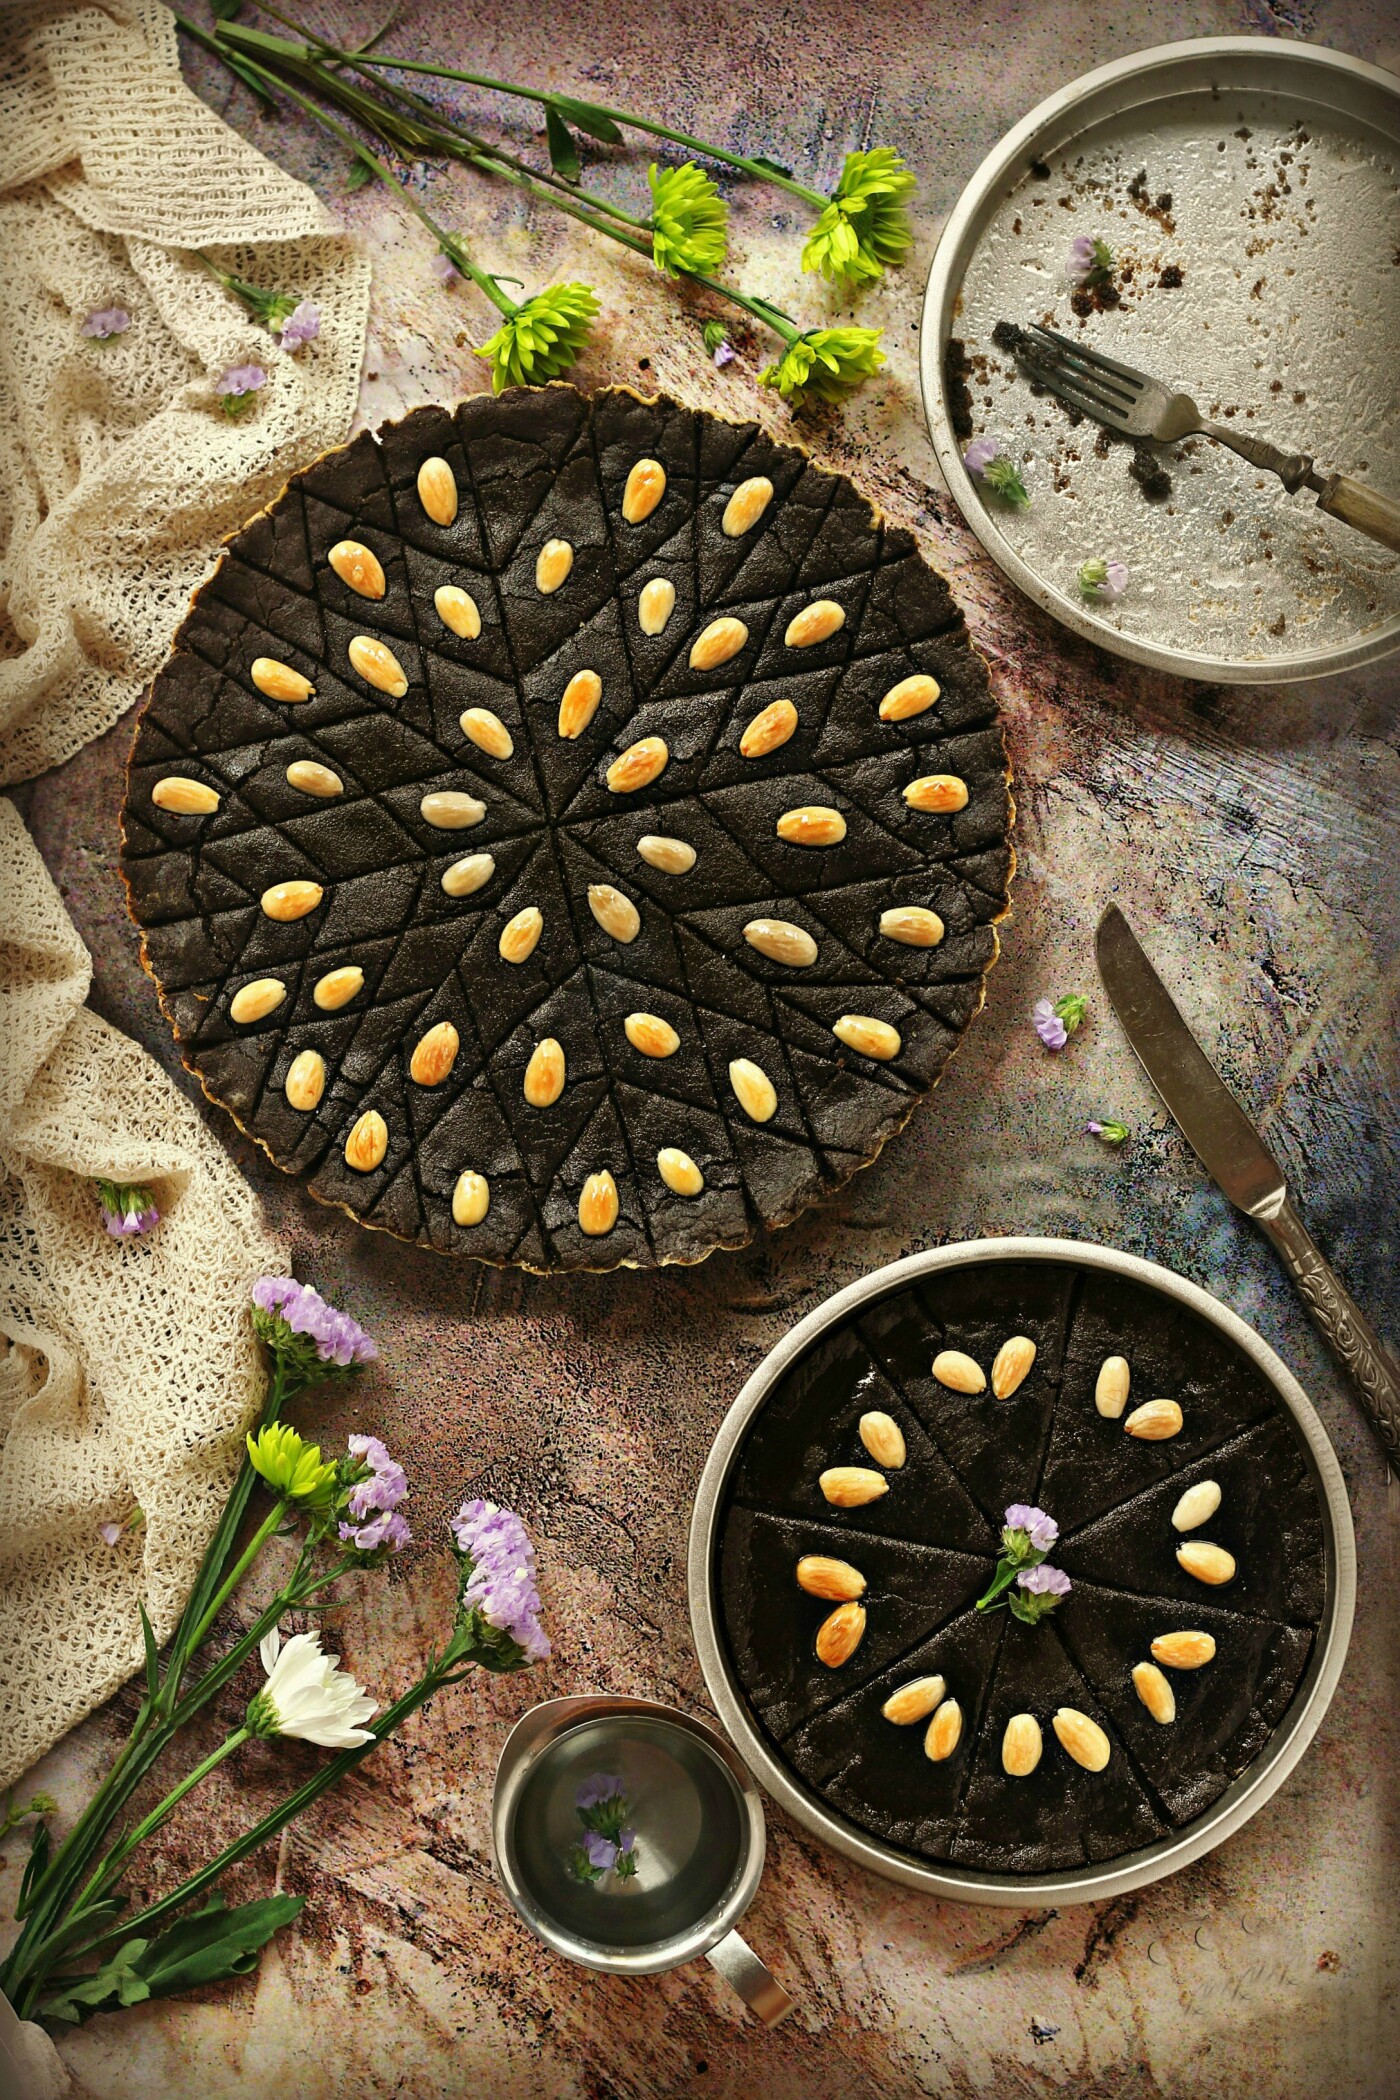  Qizha Pie is a traditional Palestinian sweet dish that consists of black cumin, or as we call it here in the middle east :qizha paste or Nigella seeds.It has many health benefits. Rich of unsaturated important fatty acids, antioxidant, powerful immune booster,  As a result of all this, black seeds are used in different cuisines especially the eastern ones as seasoning spices for salads, and bread… and here it used to make a healthy sweet pie! 